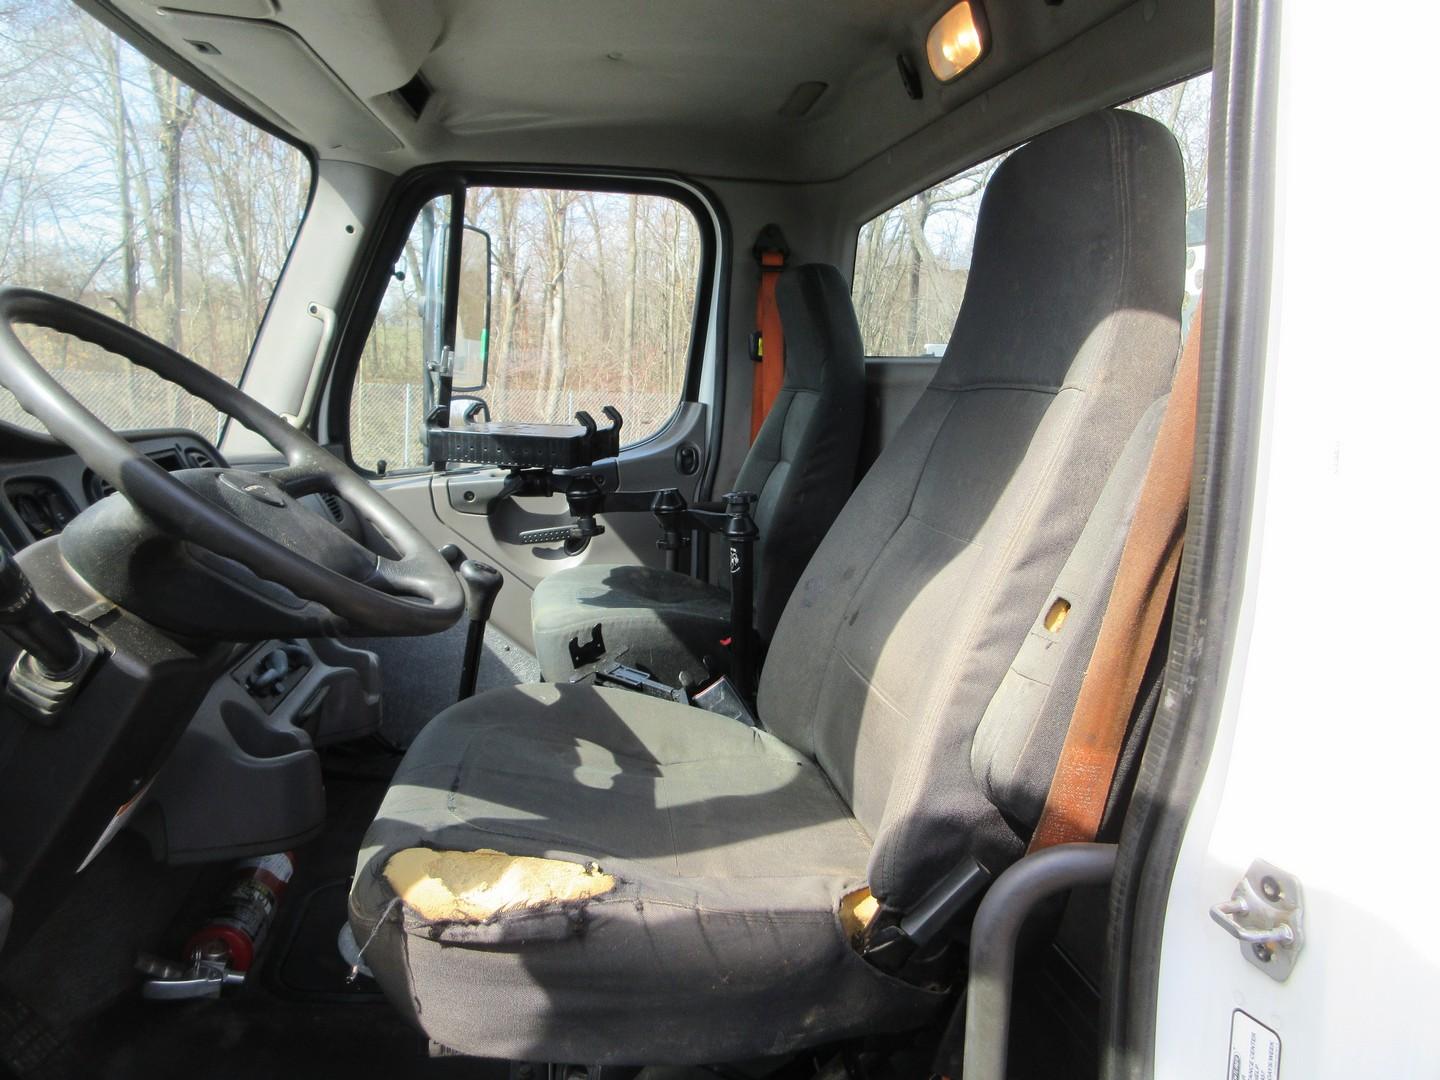 2013 Freightliner M2 S/A Service Truck